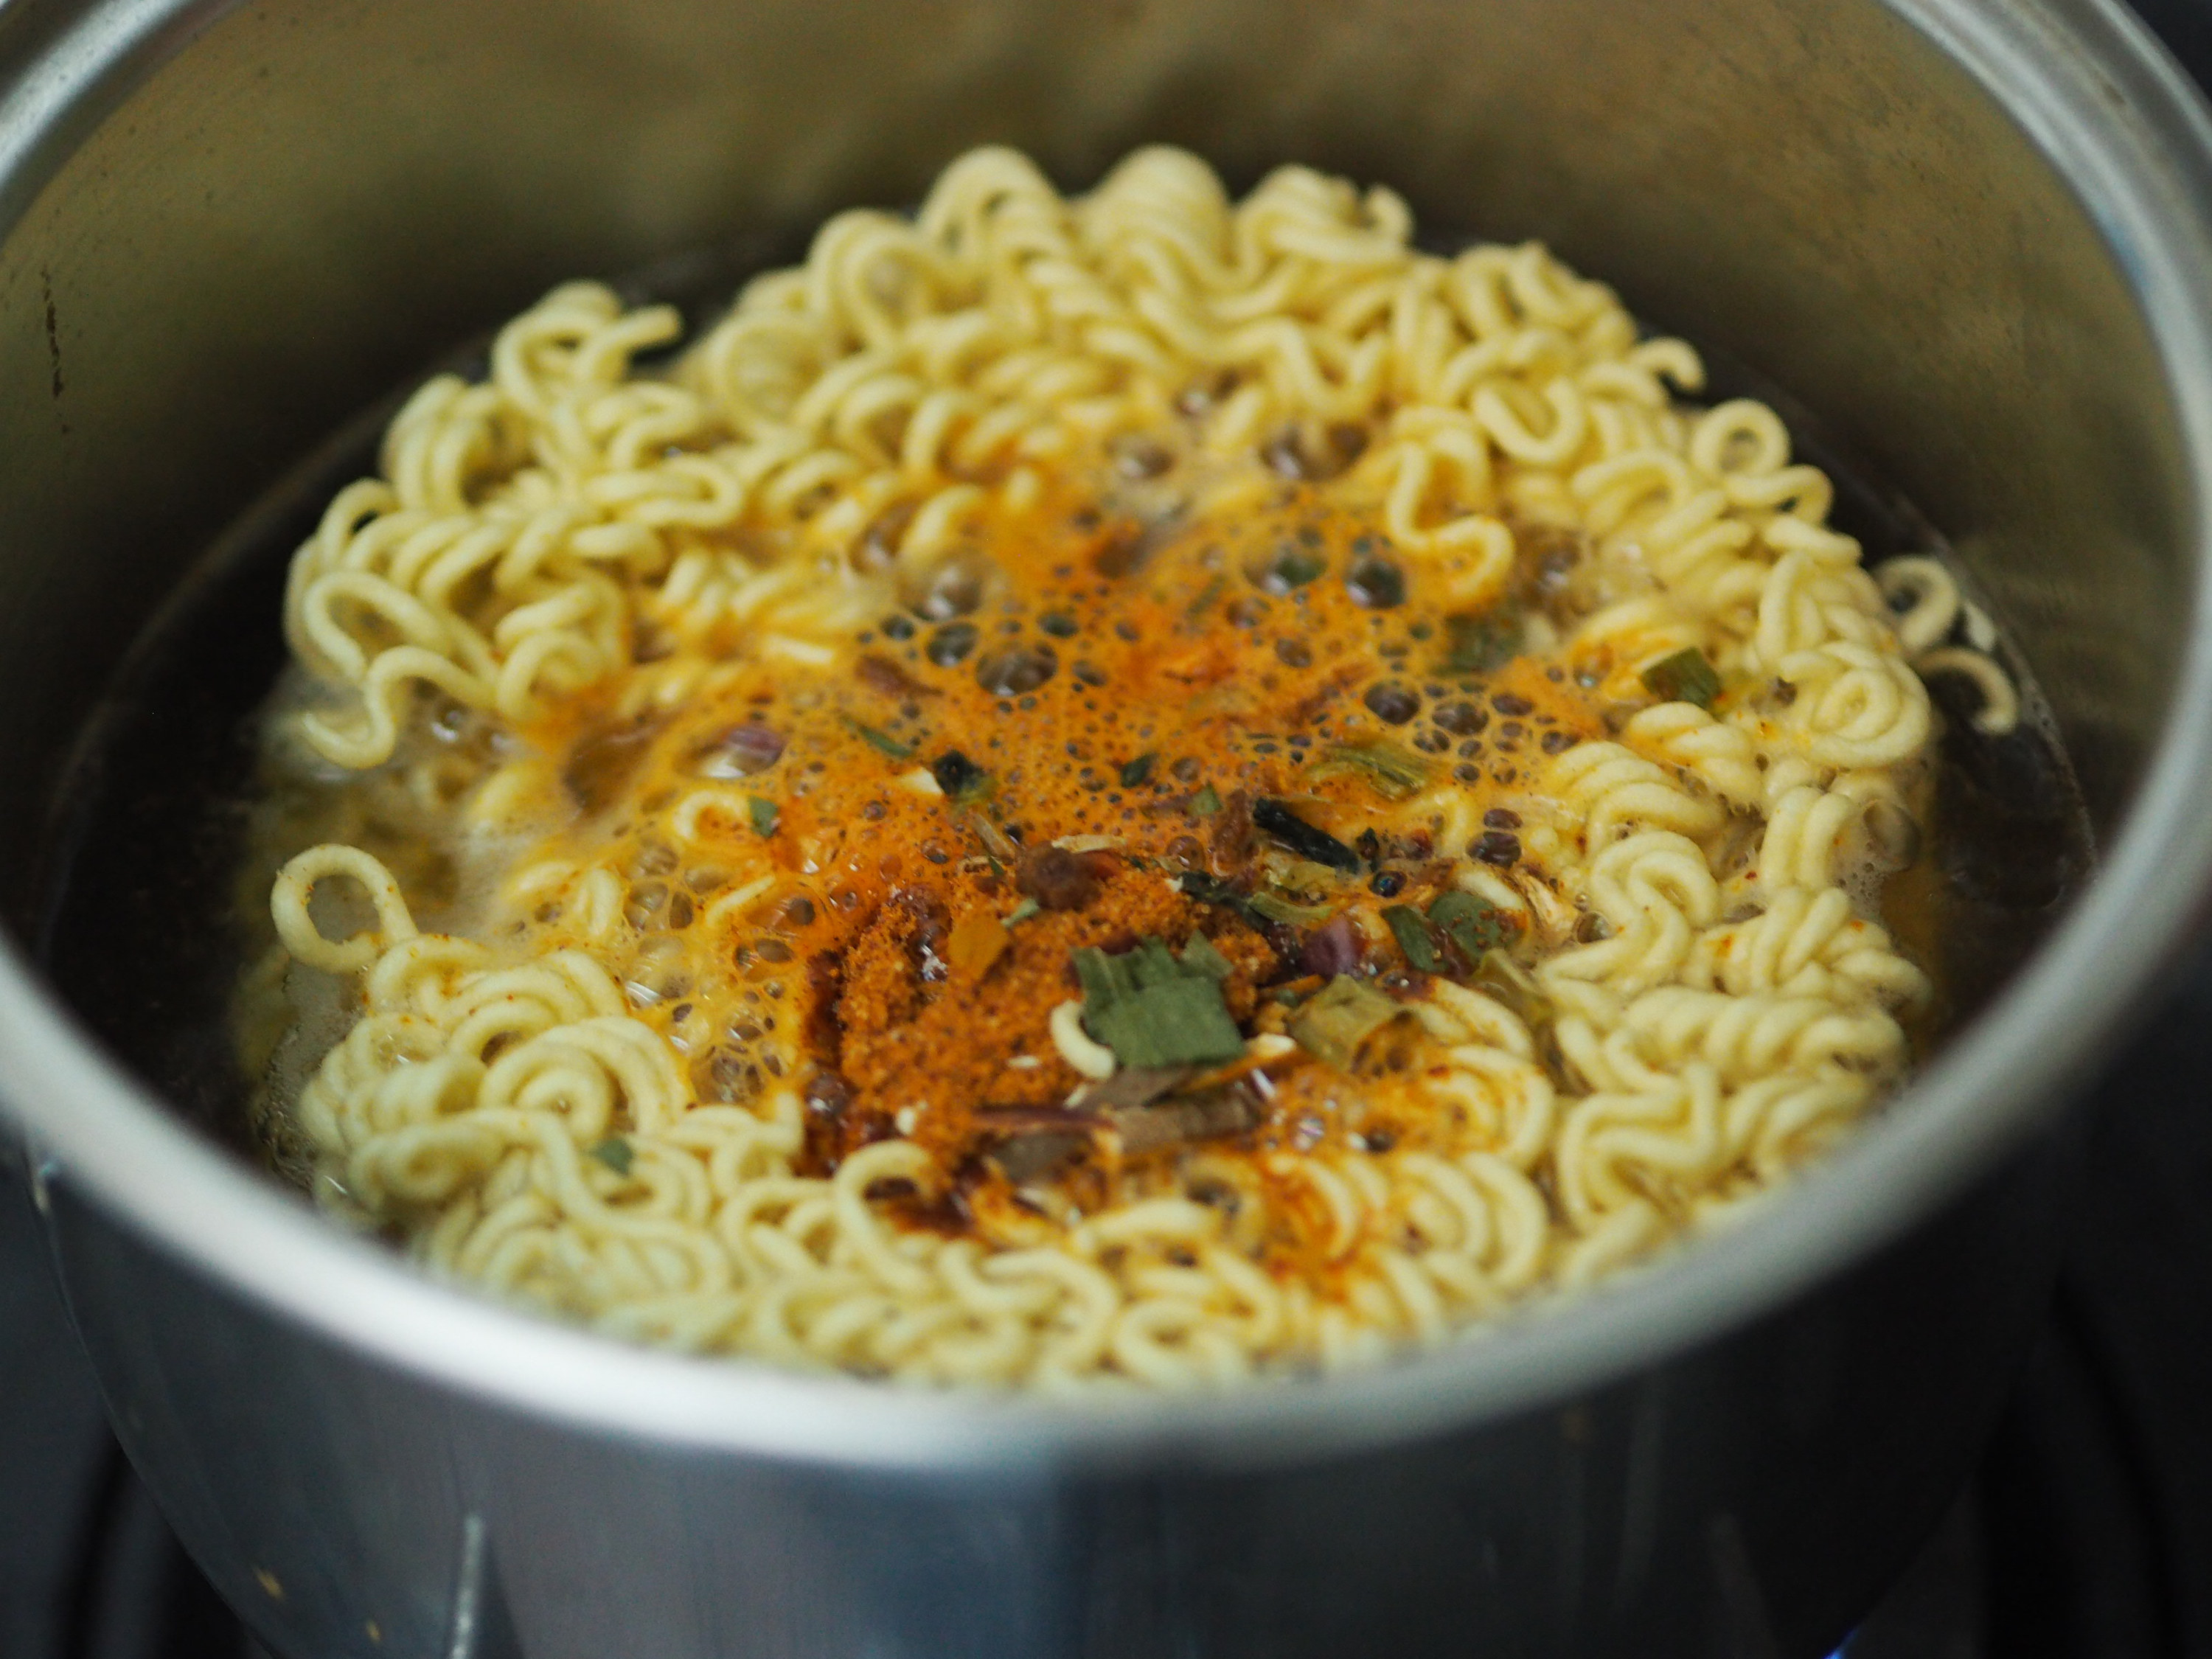 Instant noodles cooking in a pot